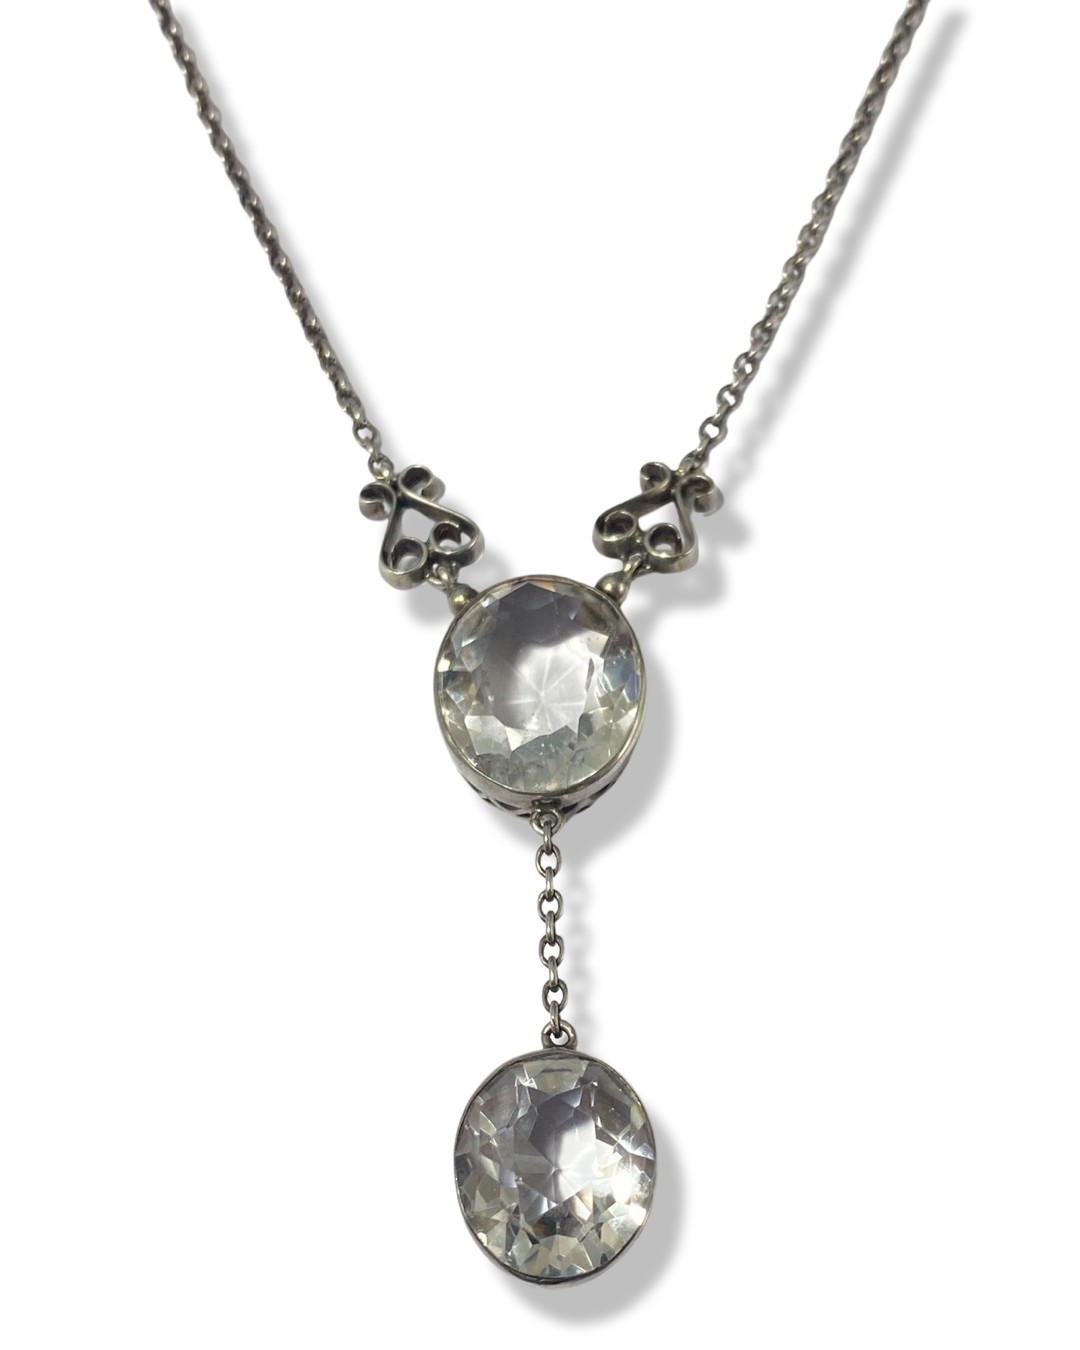 An Early 20th Century Silver Paste Lavalier Necklace weighing 8.59 grams and measuring 39.5cm in